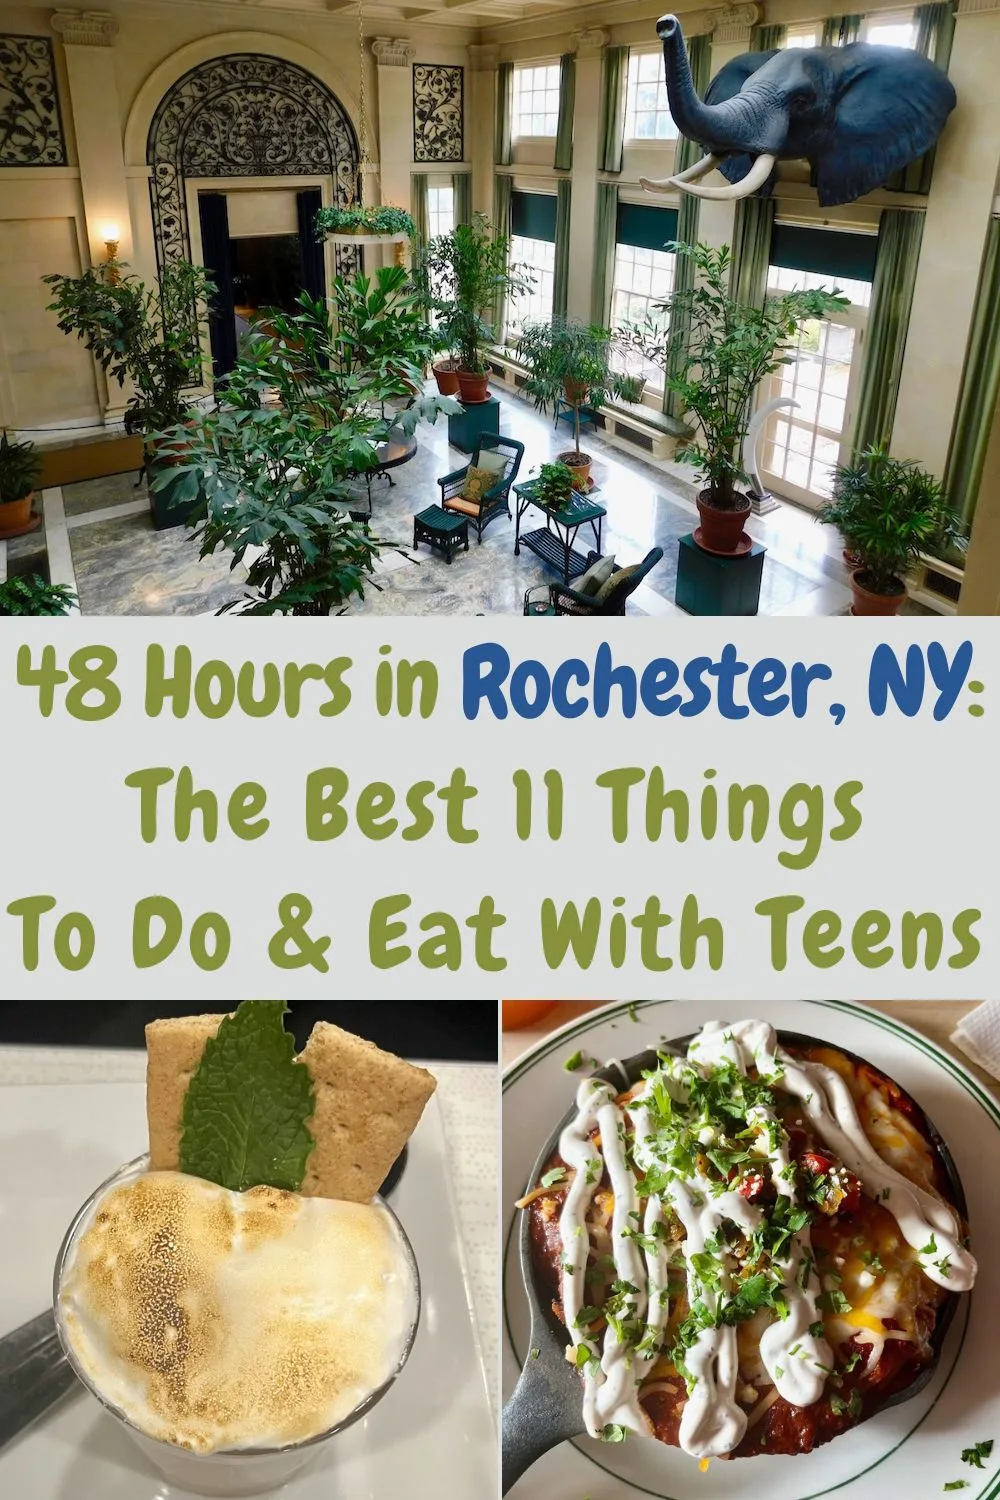 rochester, ny punches above its weight in terms of hotels, restaurants and things to do with teens. here's a plan for your weekend getaway. 